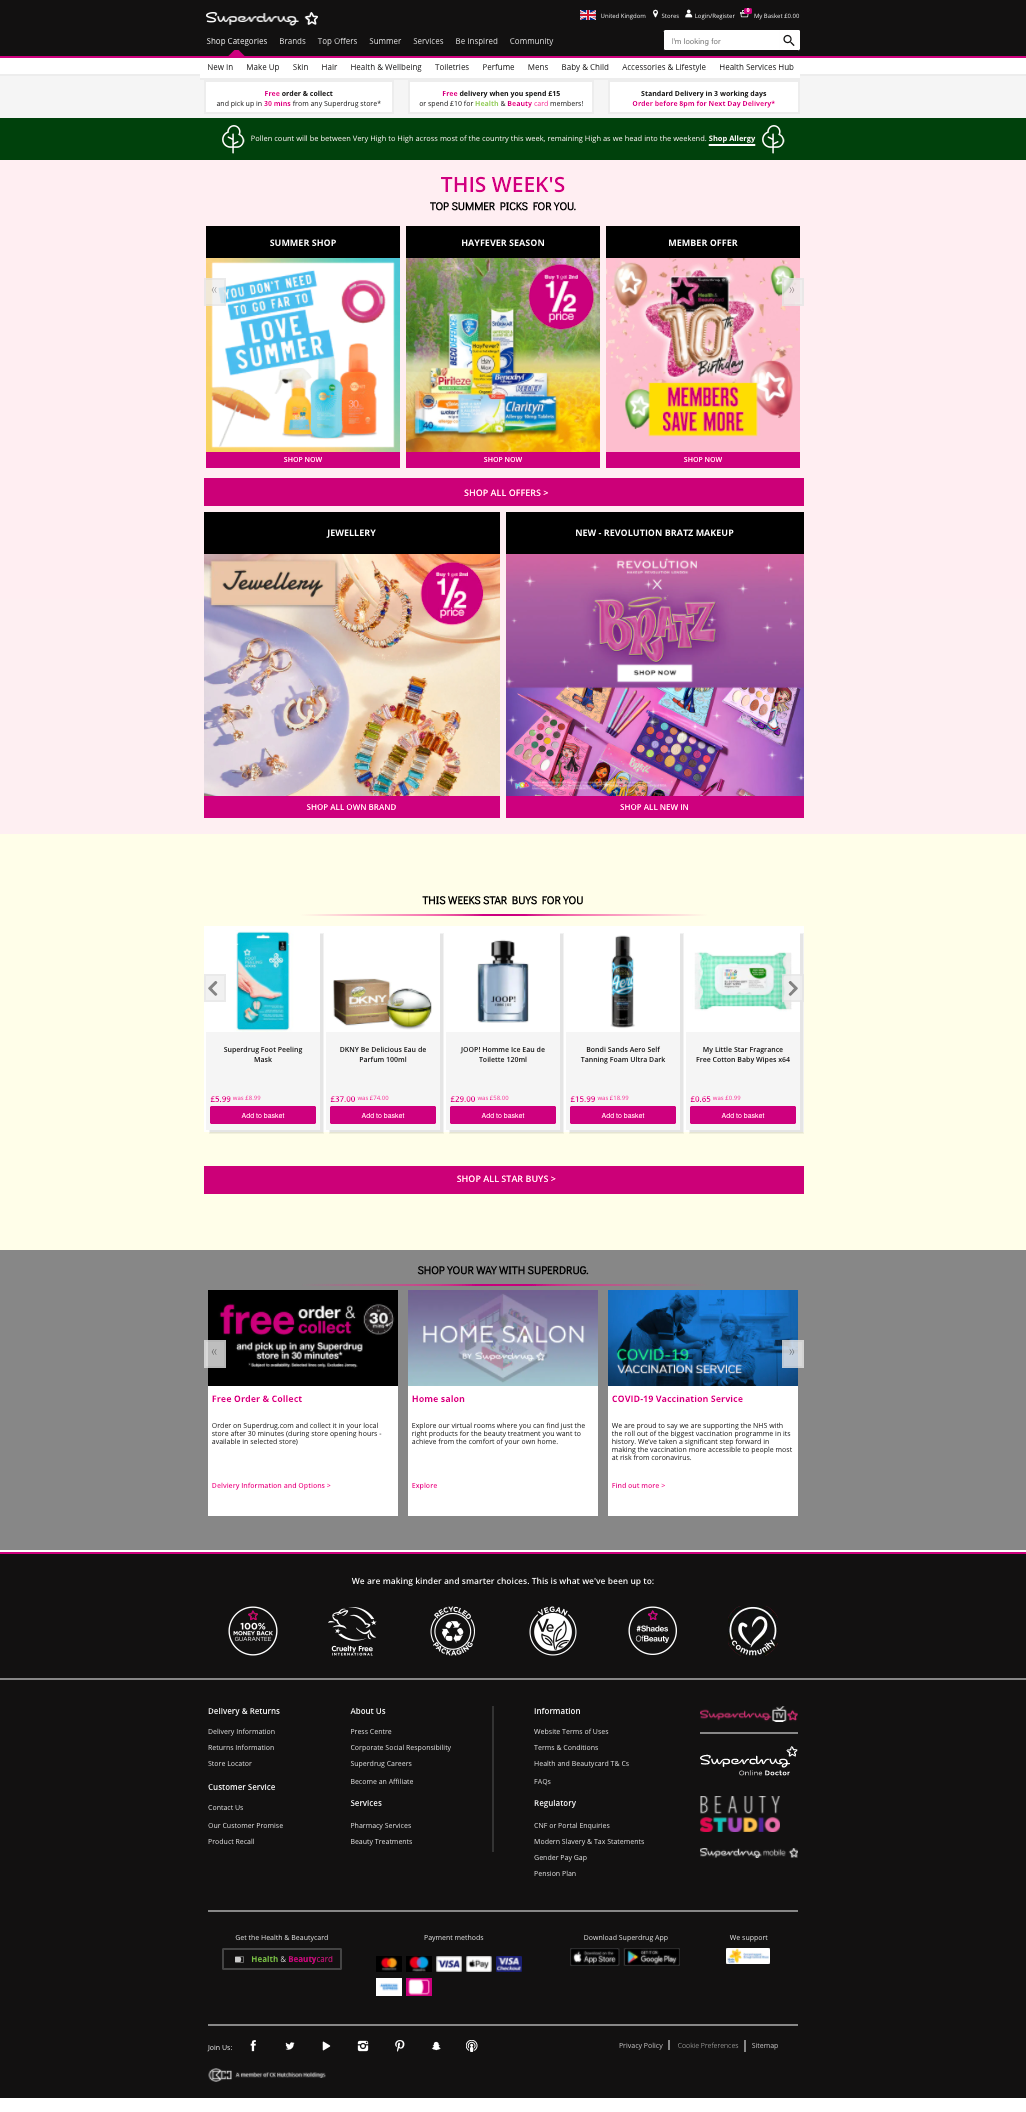 Superdrug website with WCAG's recommended colors